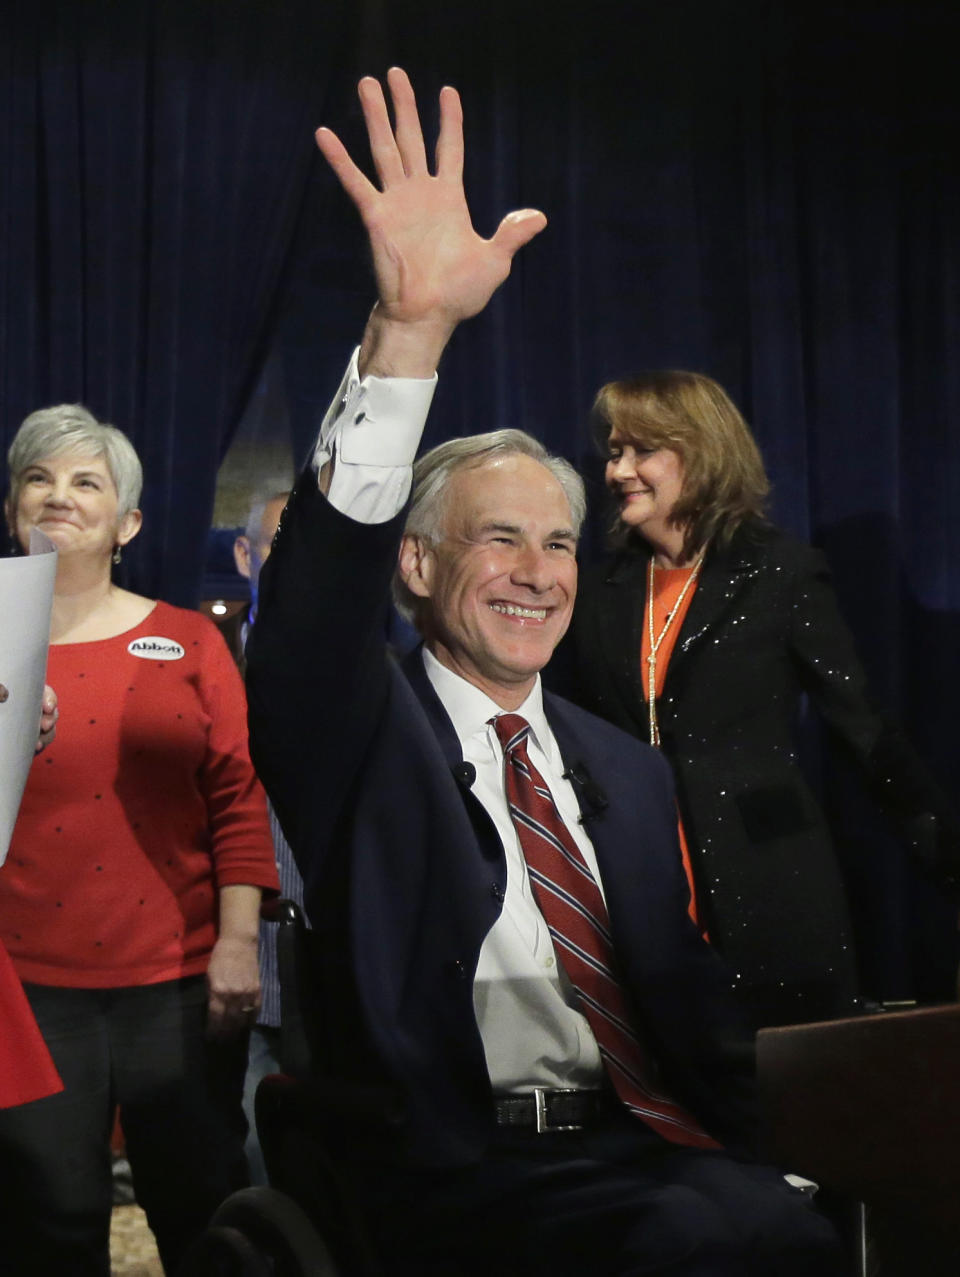 FILE - In this March 4, 2014, file photo, Texas Attorney General Greg Abbott waves to supporters as he arrives for his victory party in San Antonio. Abbott won the Republican nomination for Texas governor. On Wednesday, March 5, 2014, the state of Texas emerged from the nation's first primary of 2014 looking solidly Republican as ever. Now the Texas governor's race really begins _ and Democrat gubernatorial candidate Wendy Davis insists that, yes, it'll be a race. (AP Photo/Eric Gay, File)